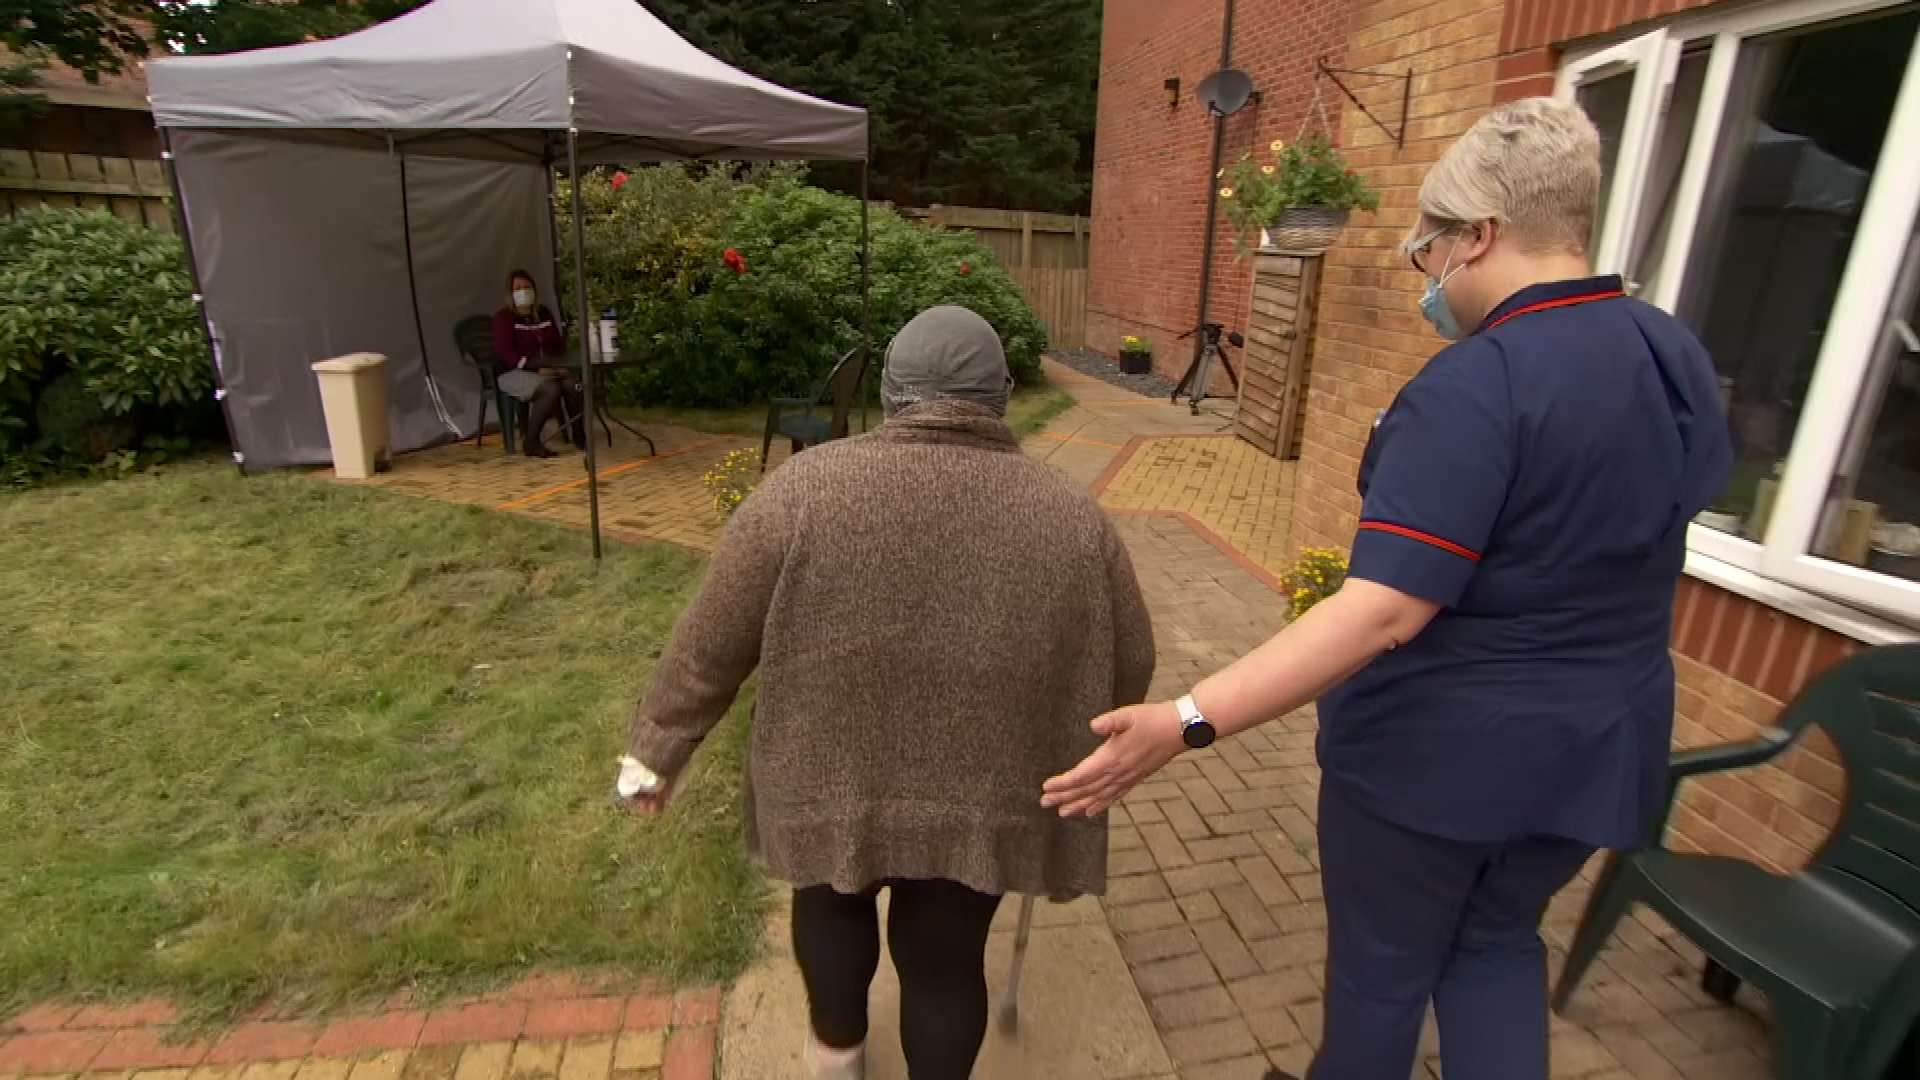 Exclusive: Majority of care homes won’t reopen to indoor visitors